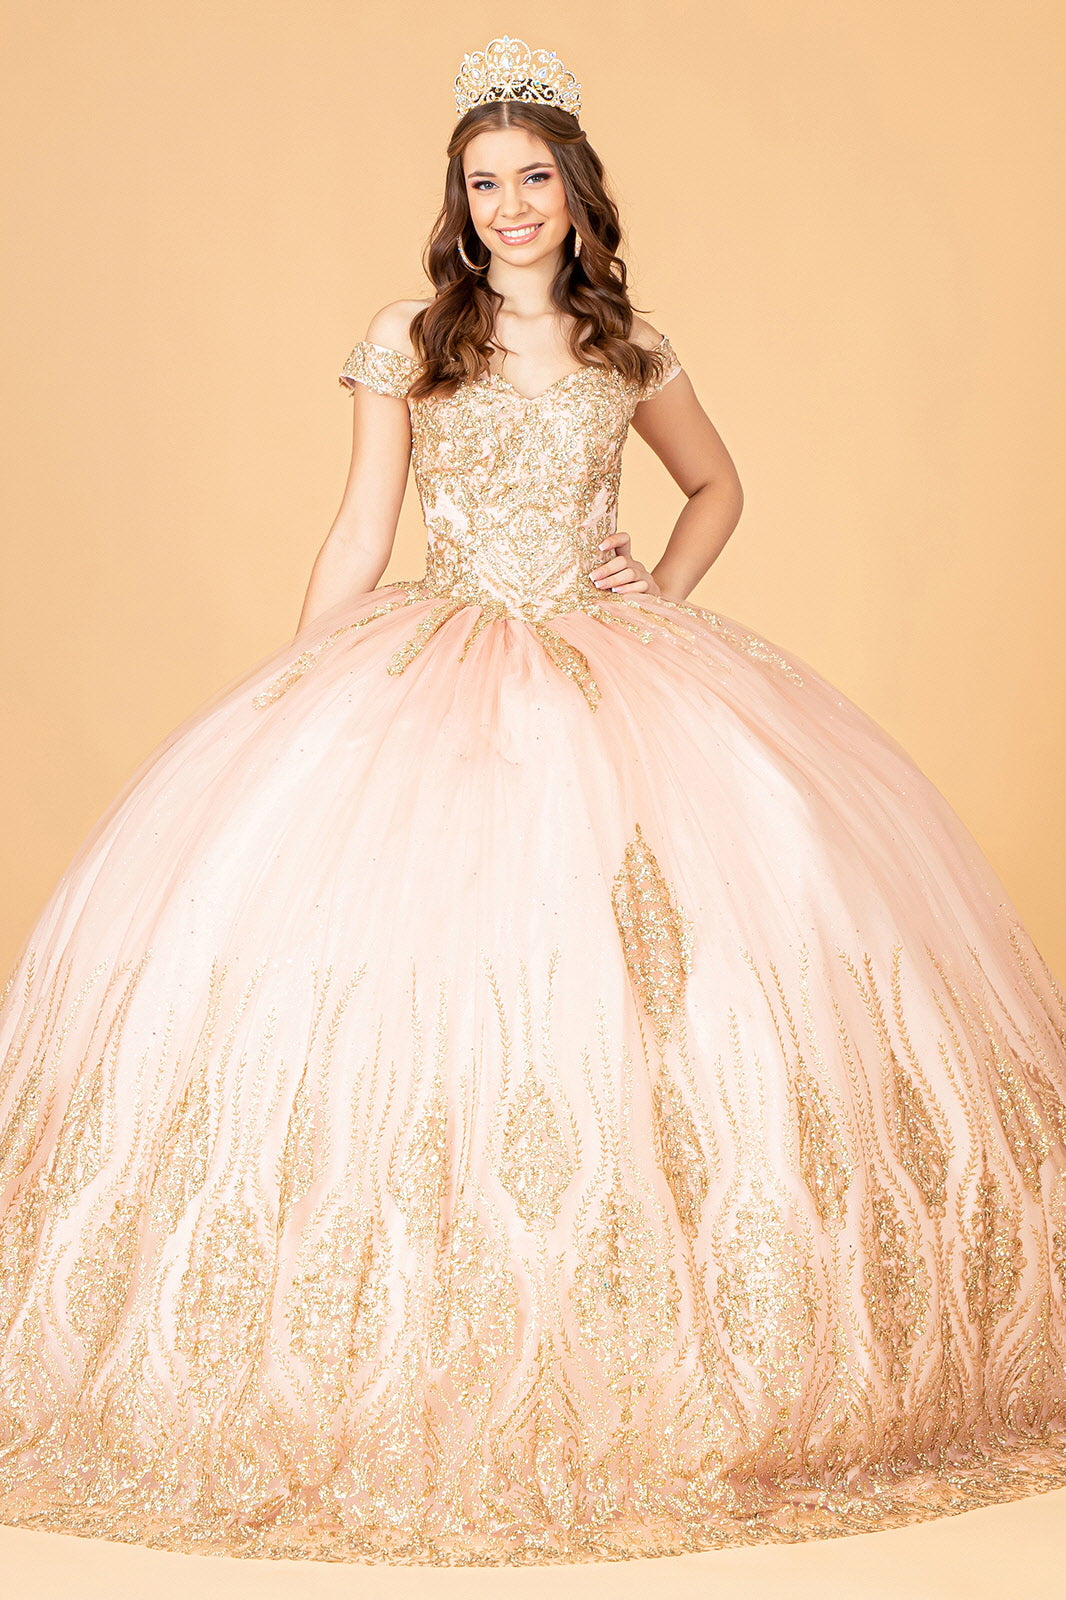 Glitter Mesh Quinceanera Dress Sequin and Beads GLGL3079-QUINCEANERA-smcfashion.com